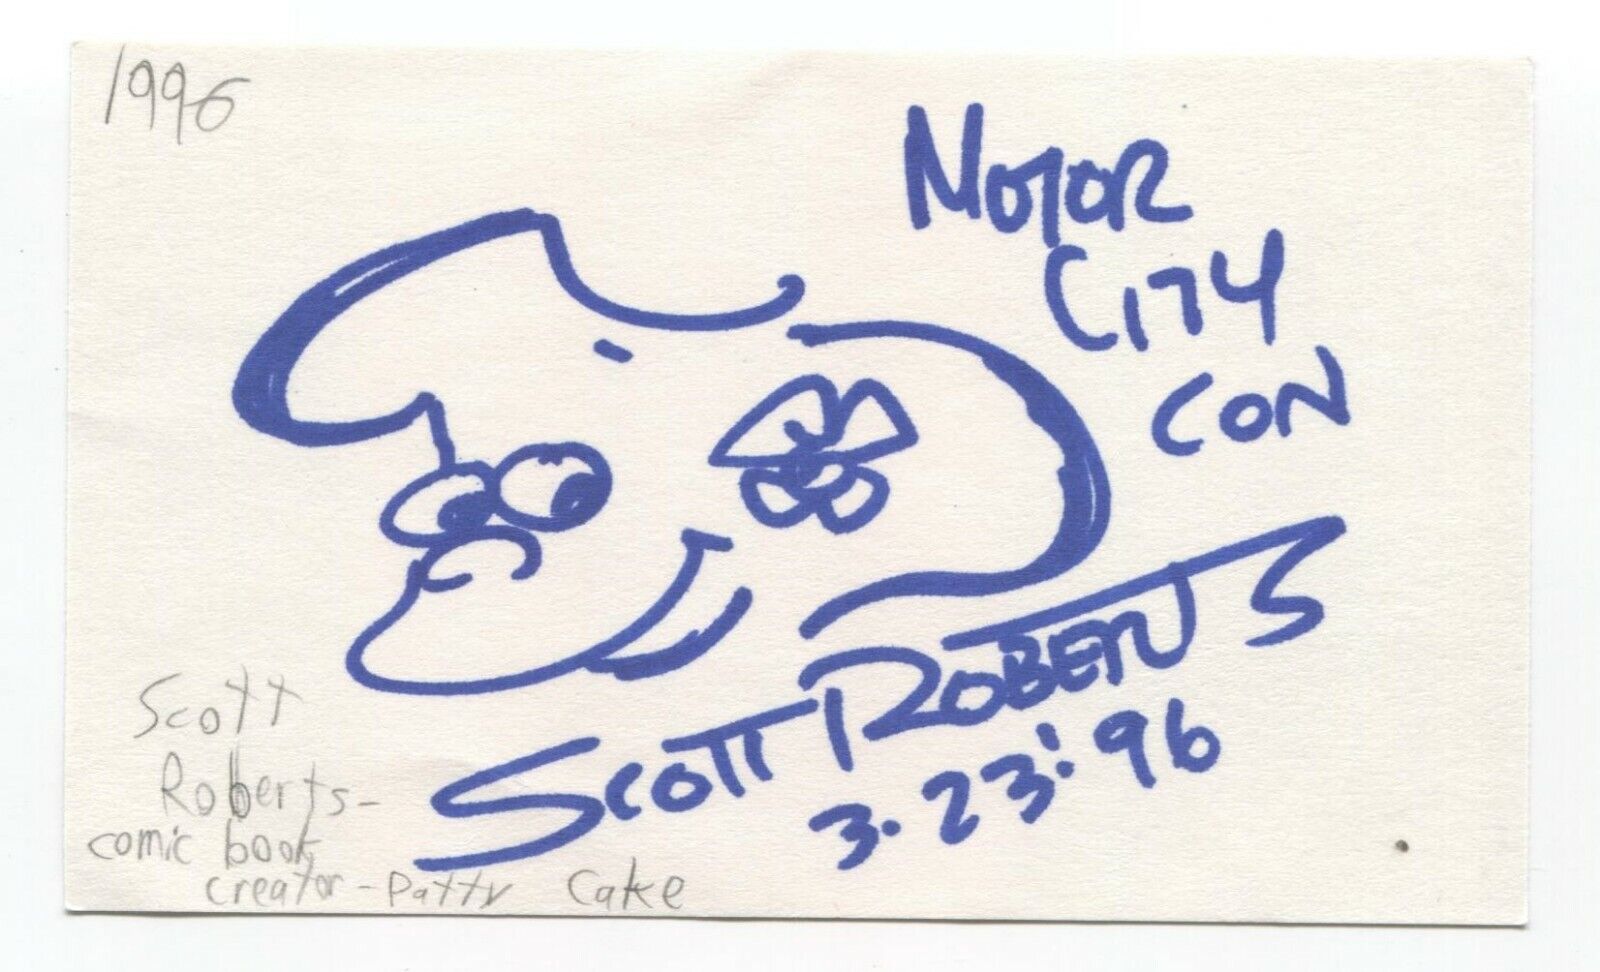 Scott Roberts Signed 3x5 Index Card Autographed Sketch Comic Artist Patty Cake